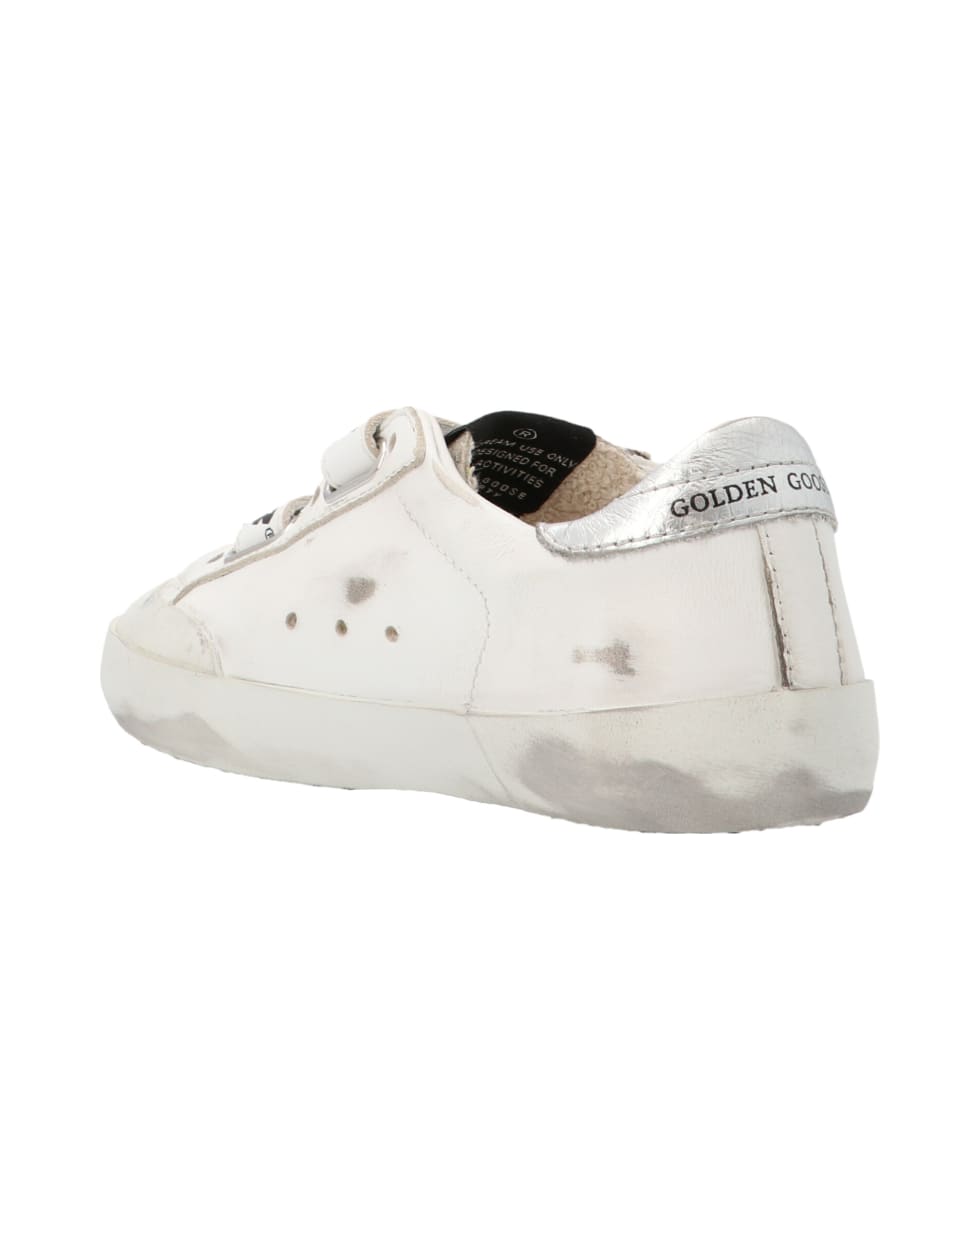 Golden Goose 'old School' Shoes - White